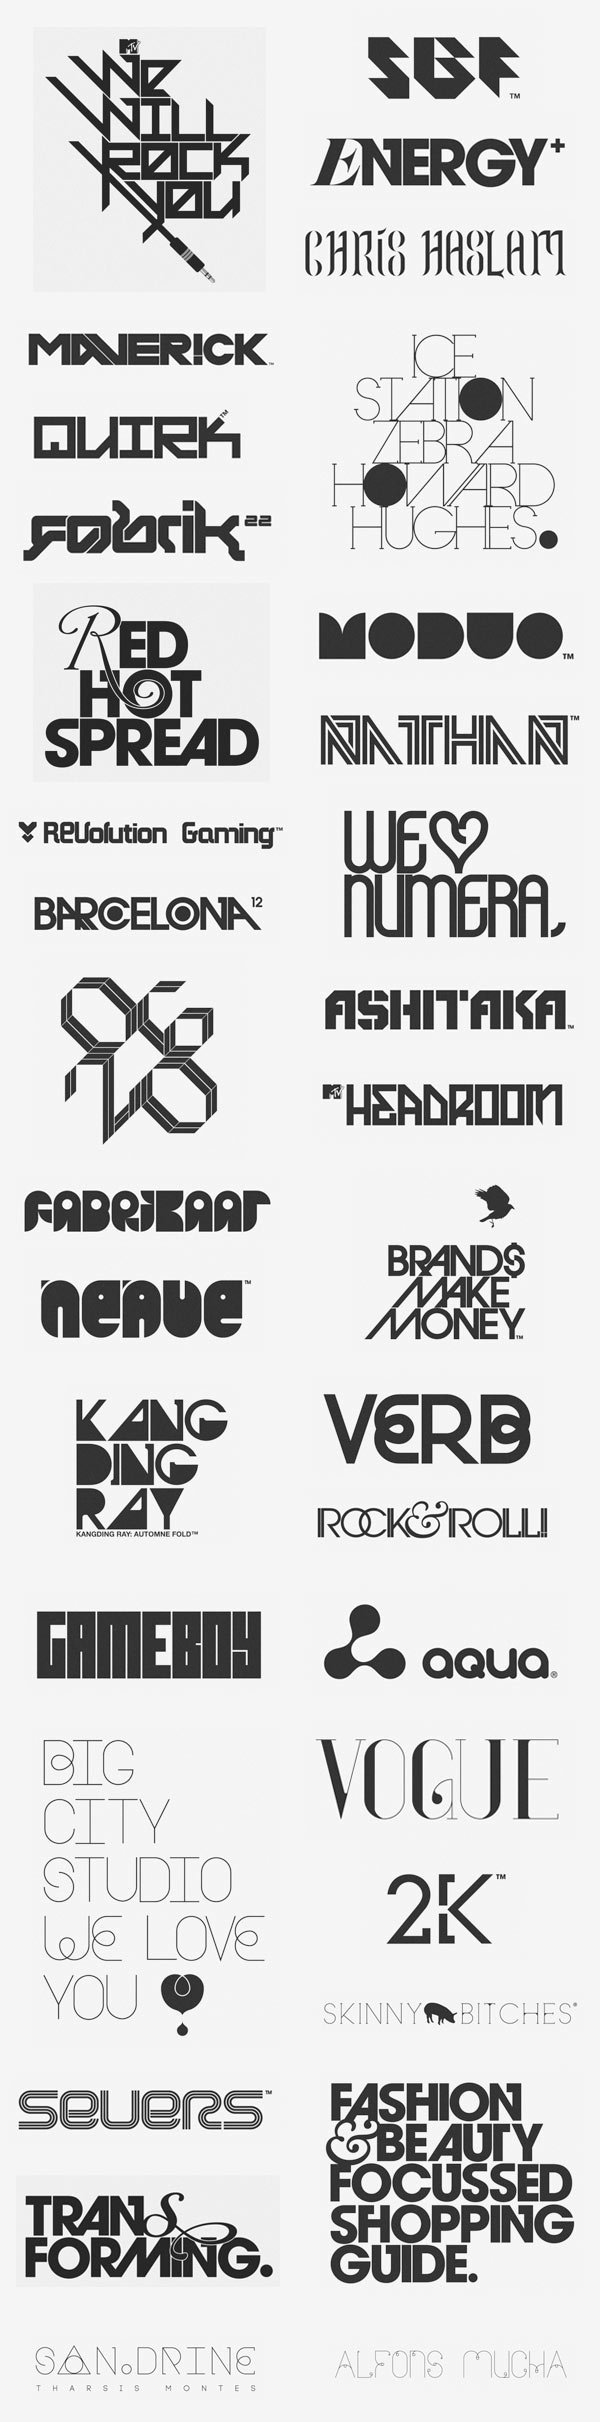 Logos and Logotypes by Anthony Neil Dart